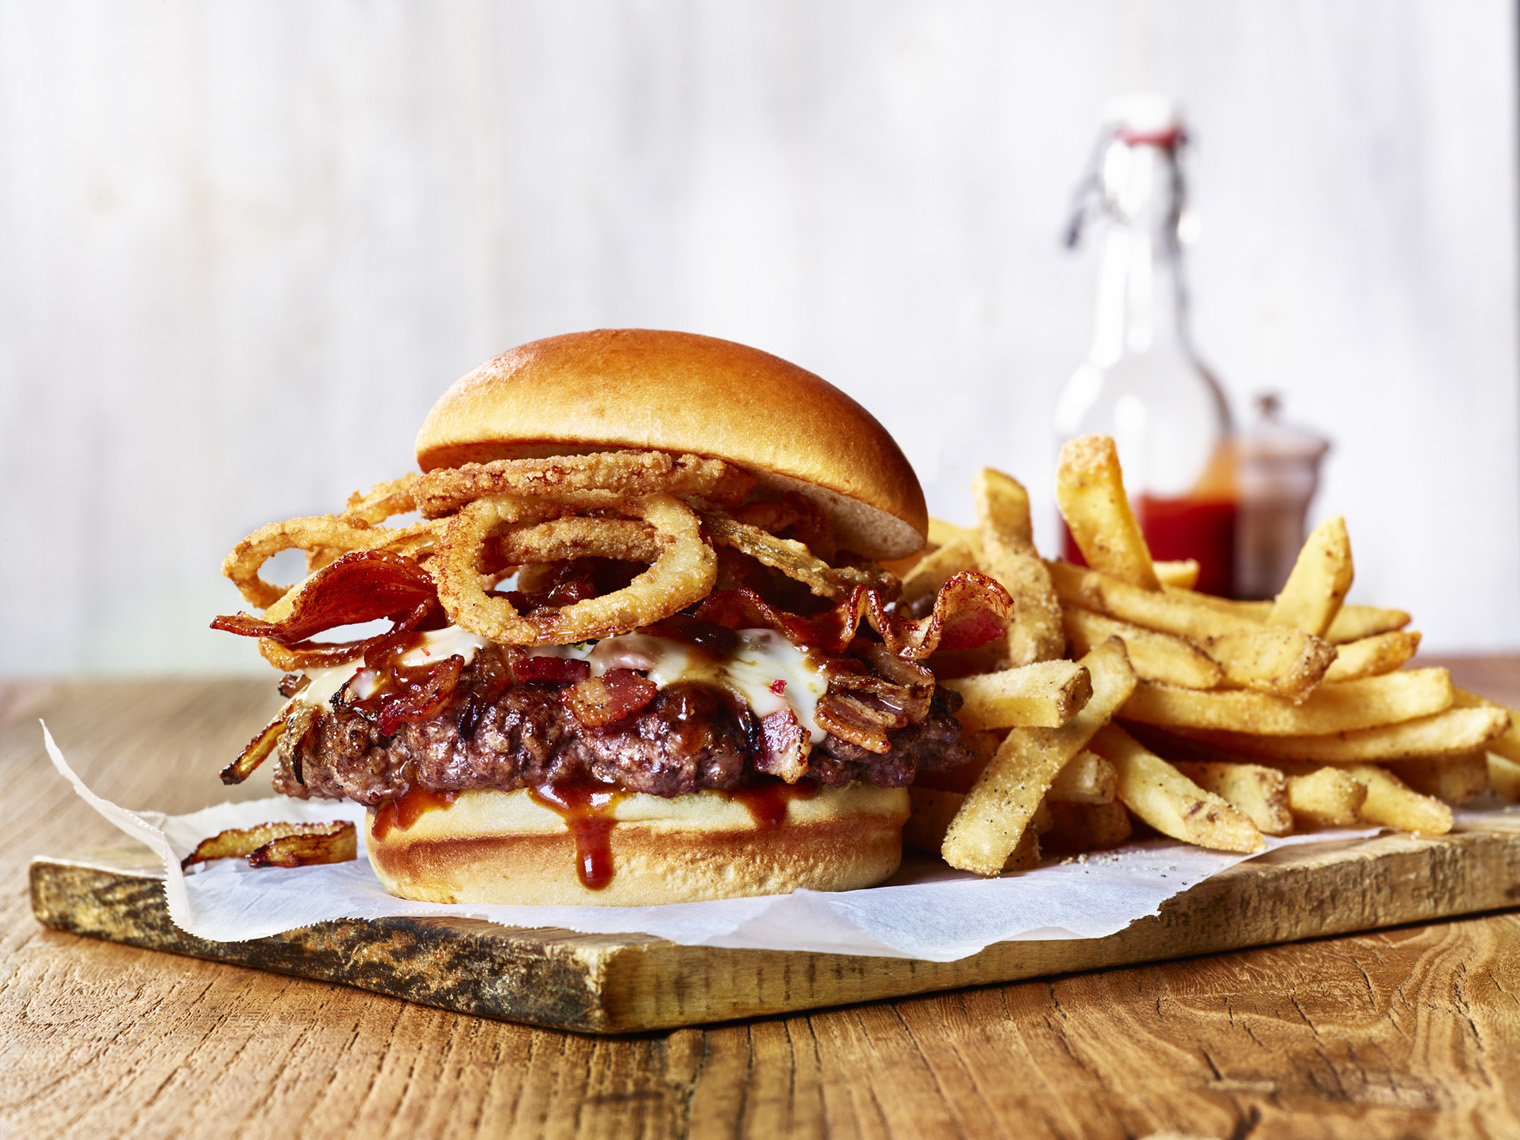 LEIGH_BEISCH_Whisky_Bacon_Burger_Classic_Fries_12351